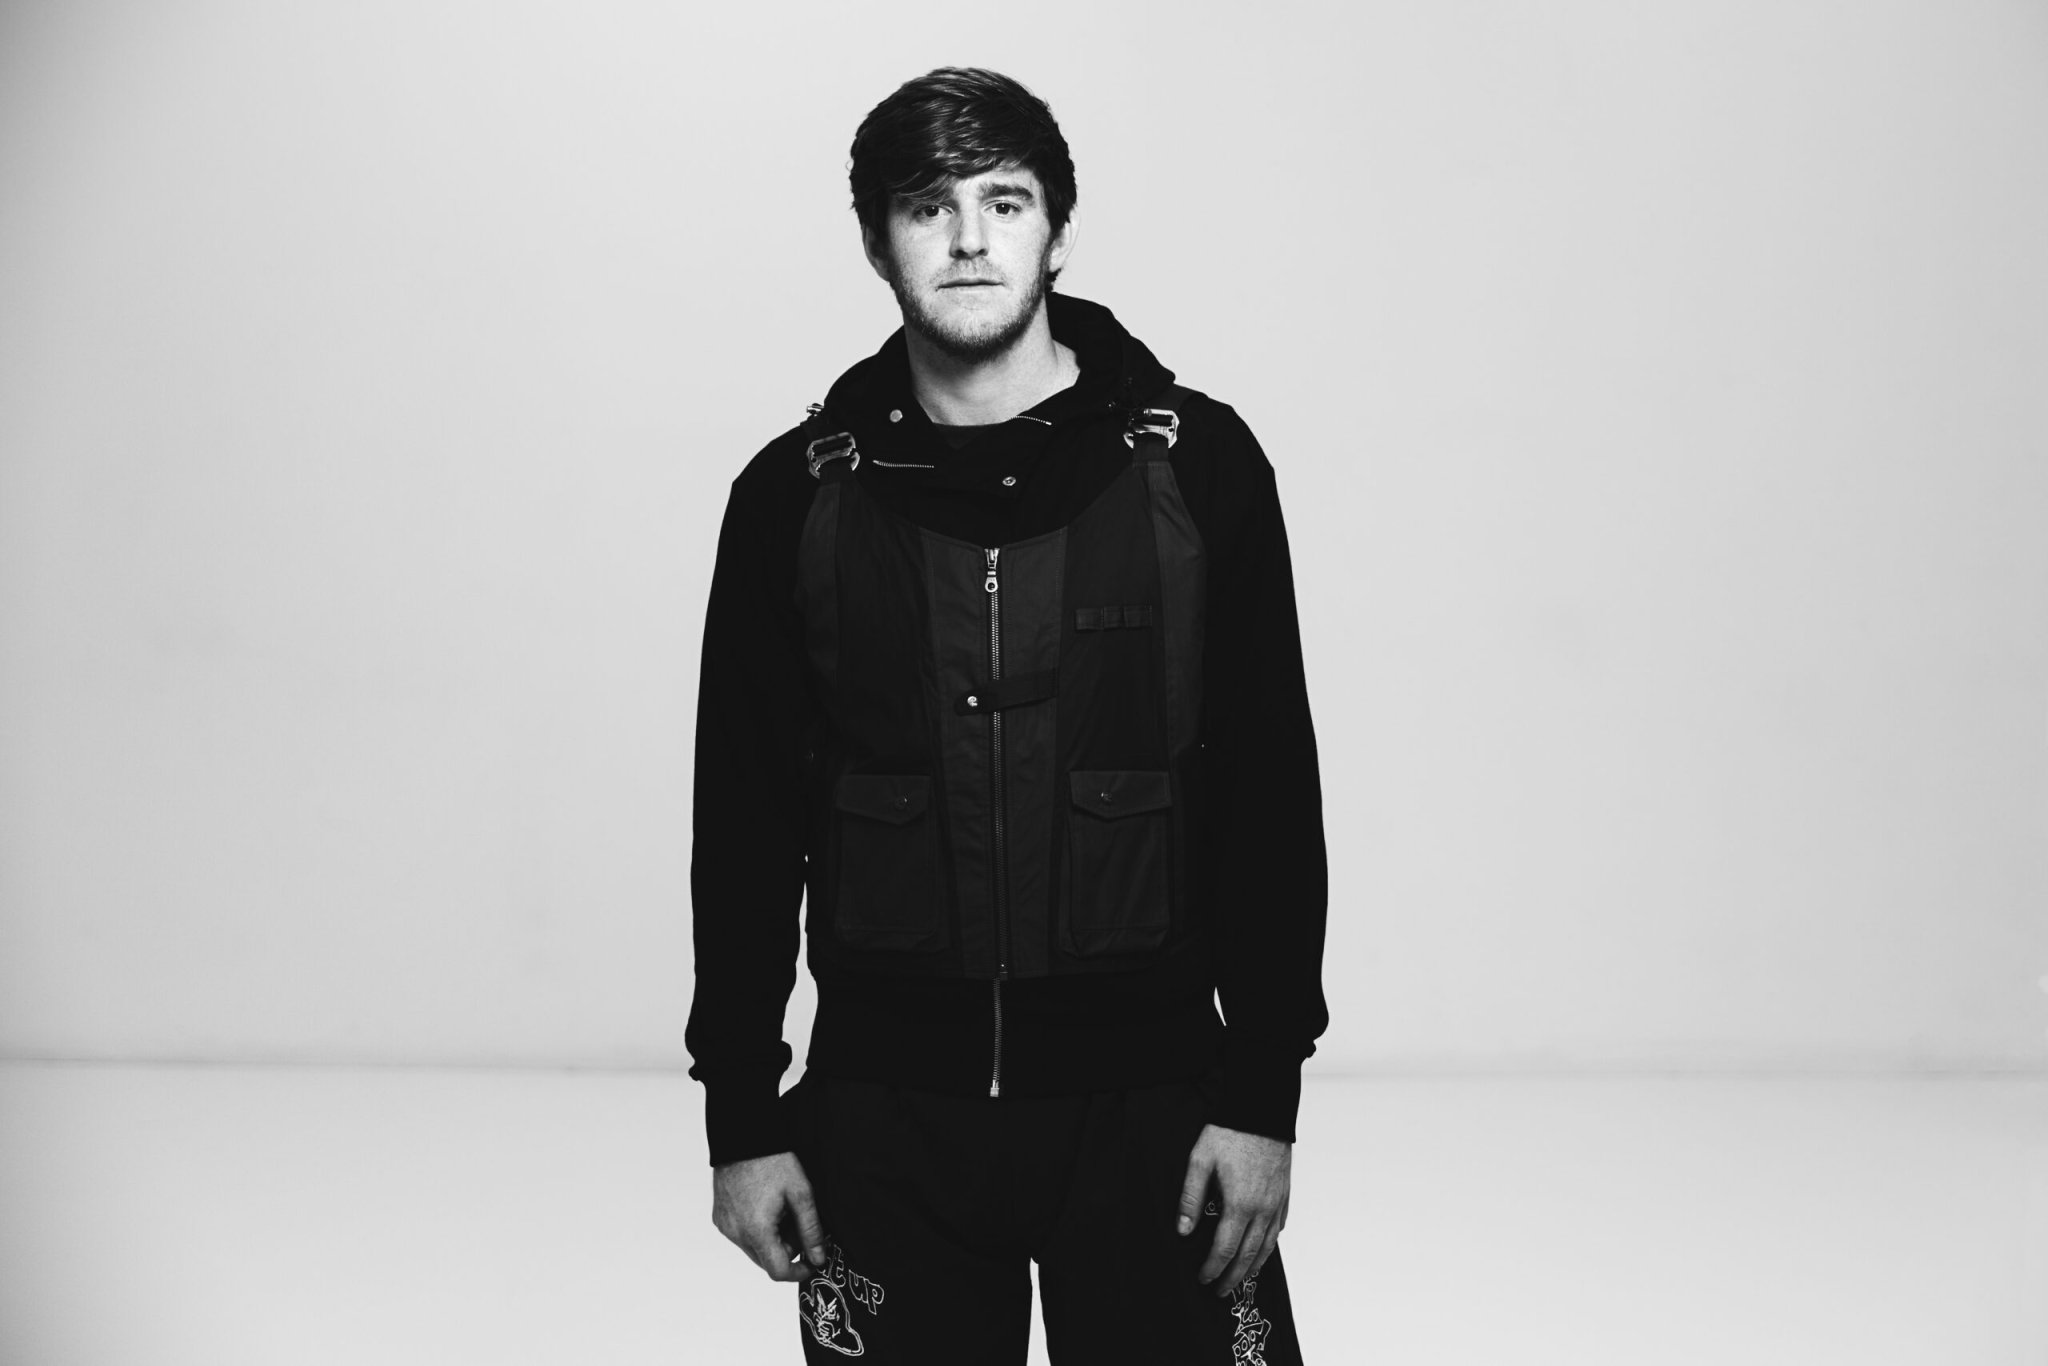 5 Albums I Can’t Live Without: NGHTMRE